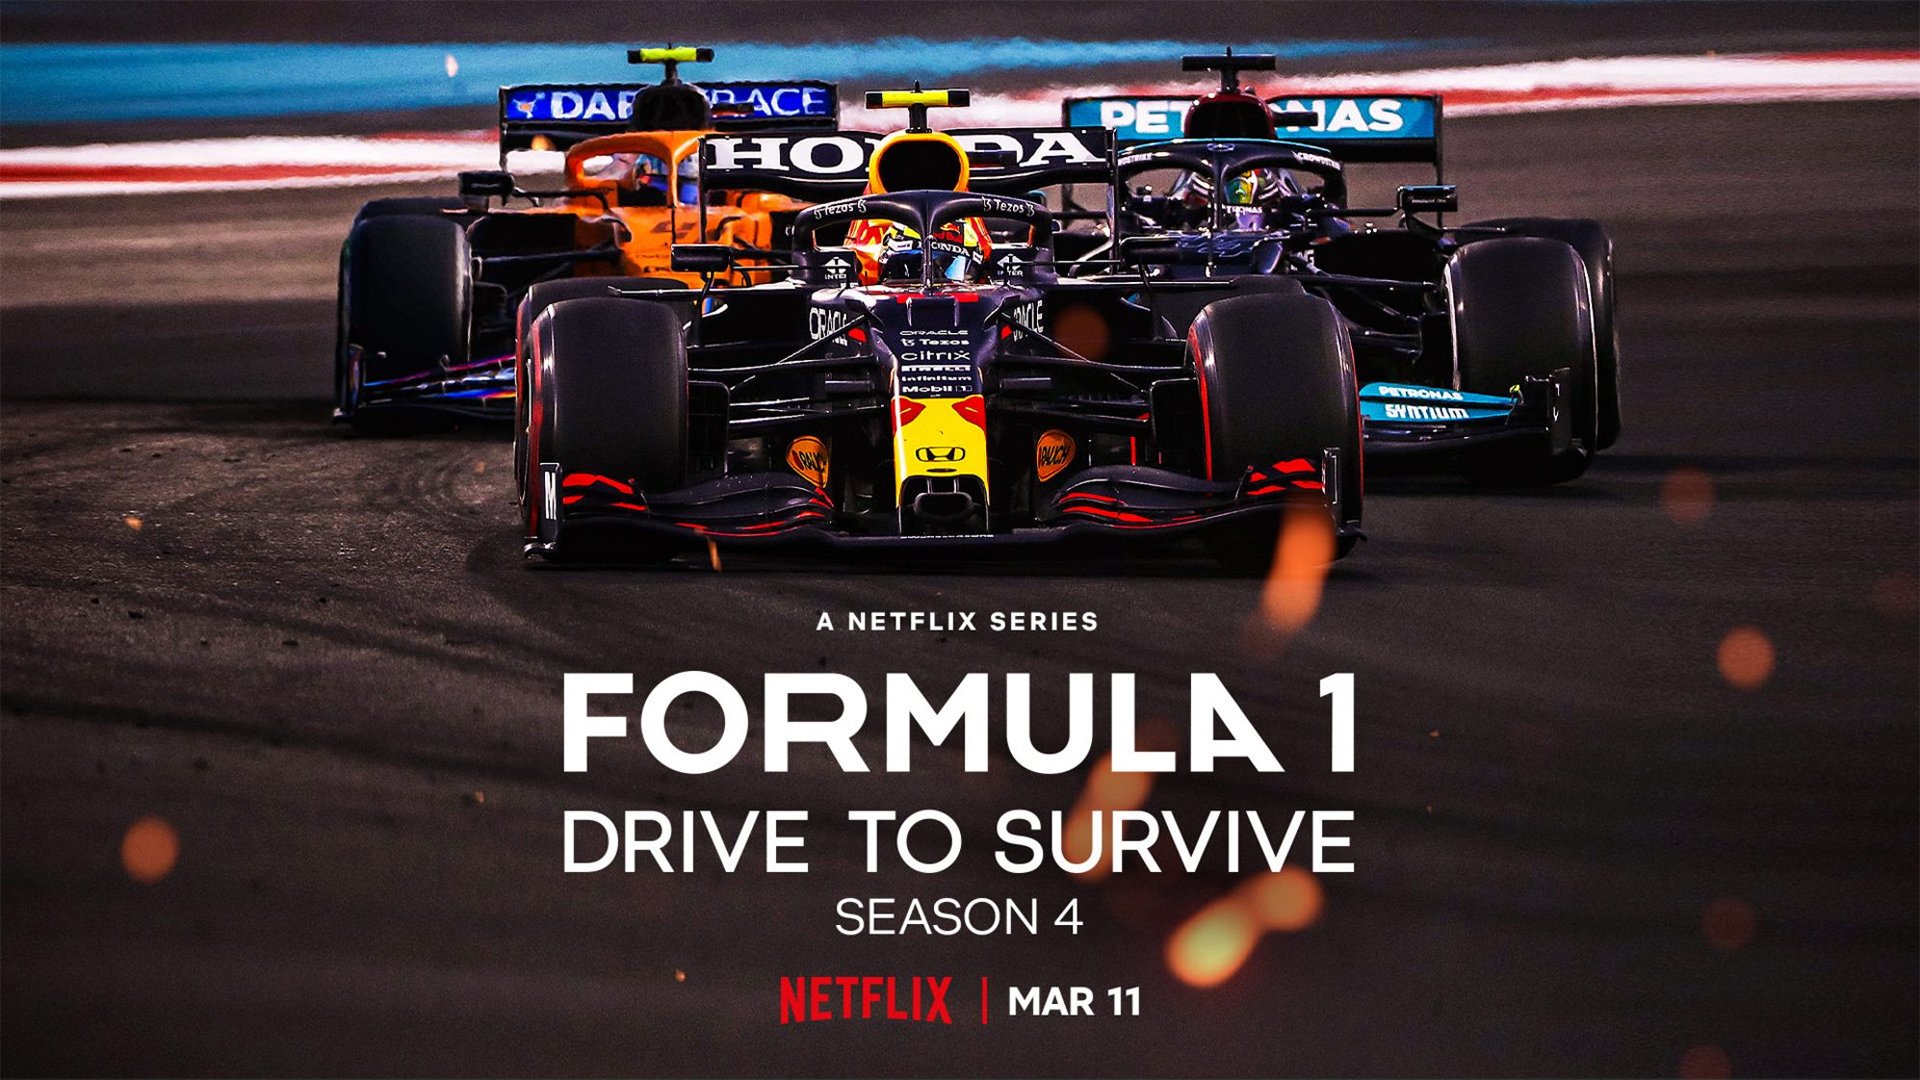 Netflix Formula 1 Drive to Survive Returns for Season 4 on March 11